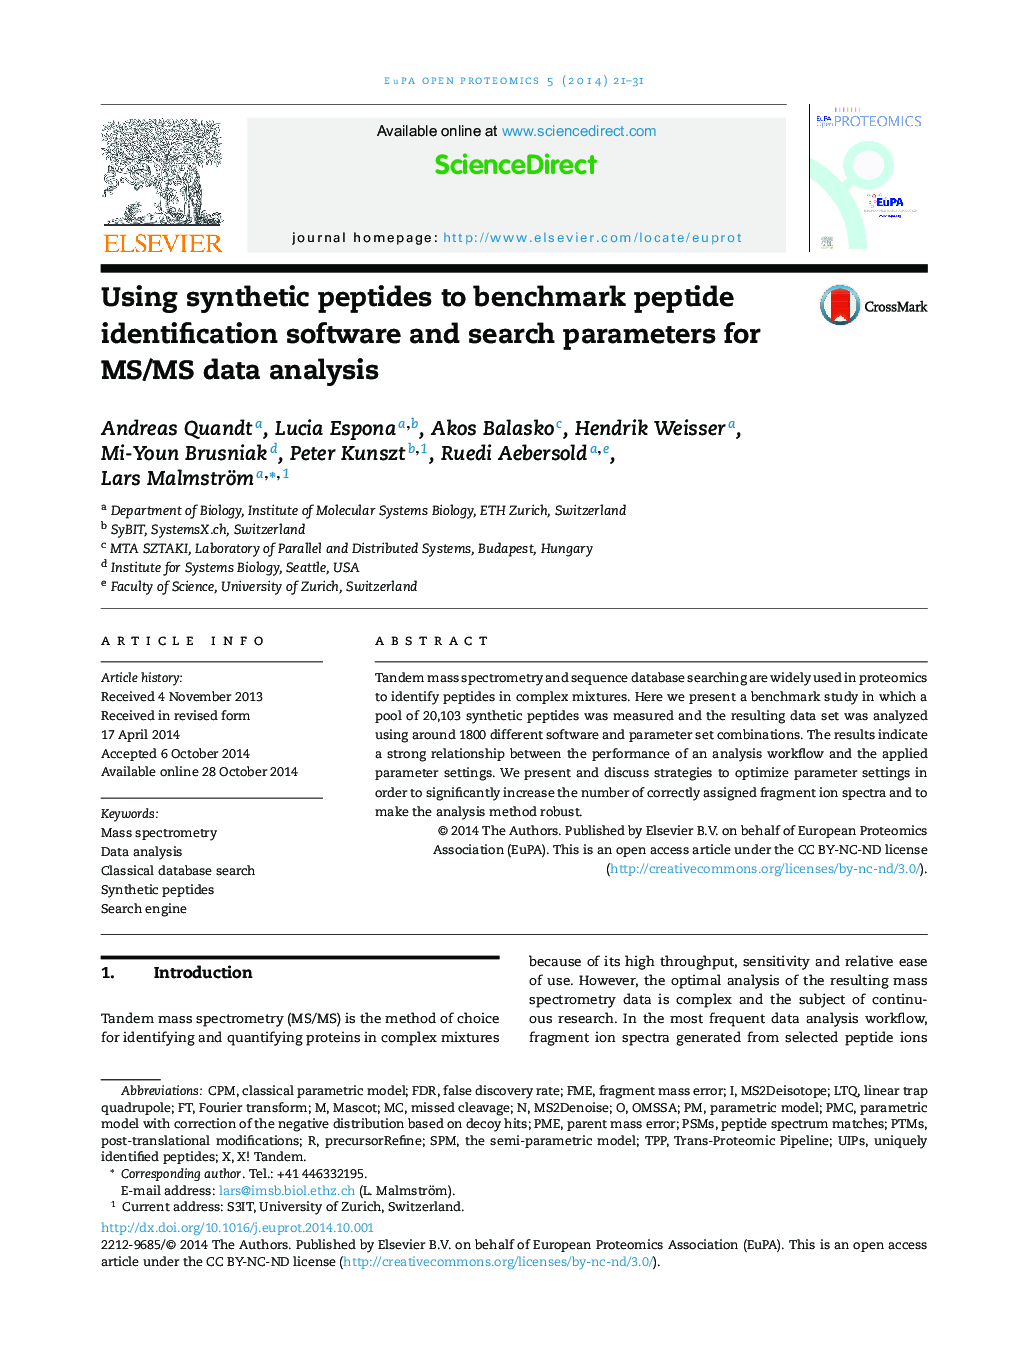 Using synthetic peptides to benchmark peptide identification software and search parameters for MS/MS data analysis